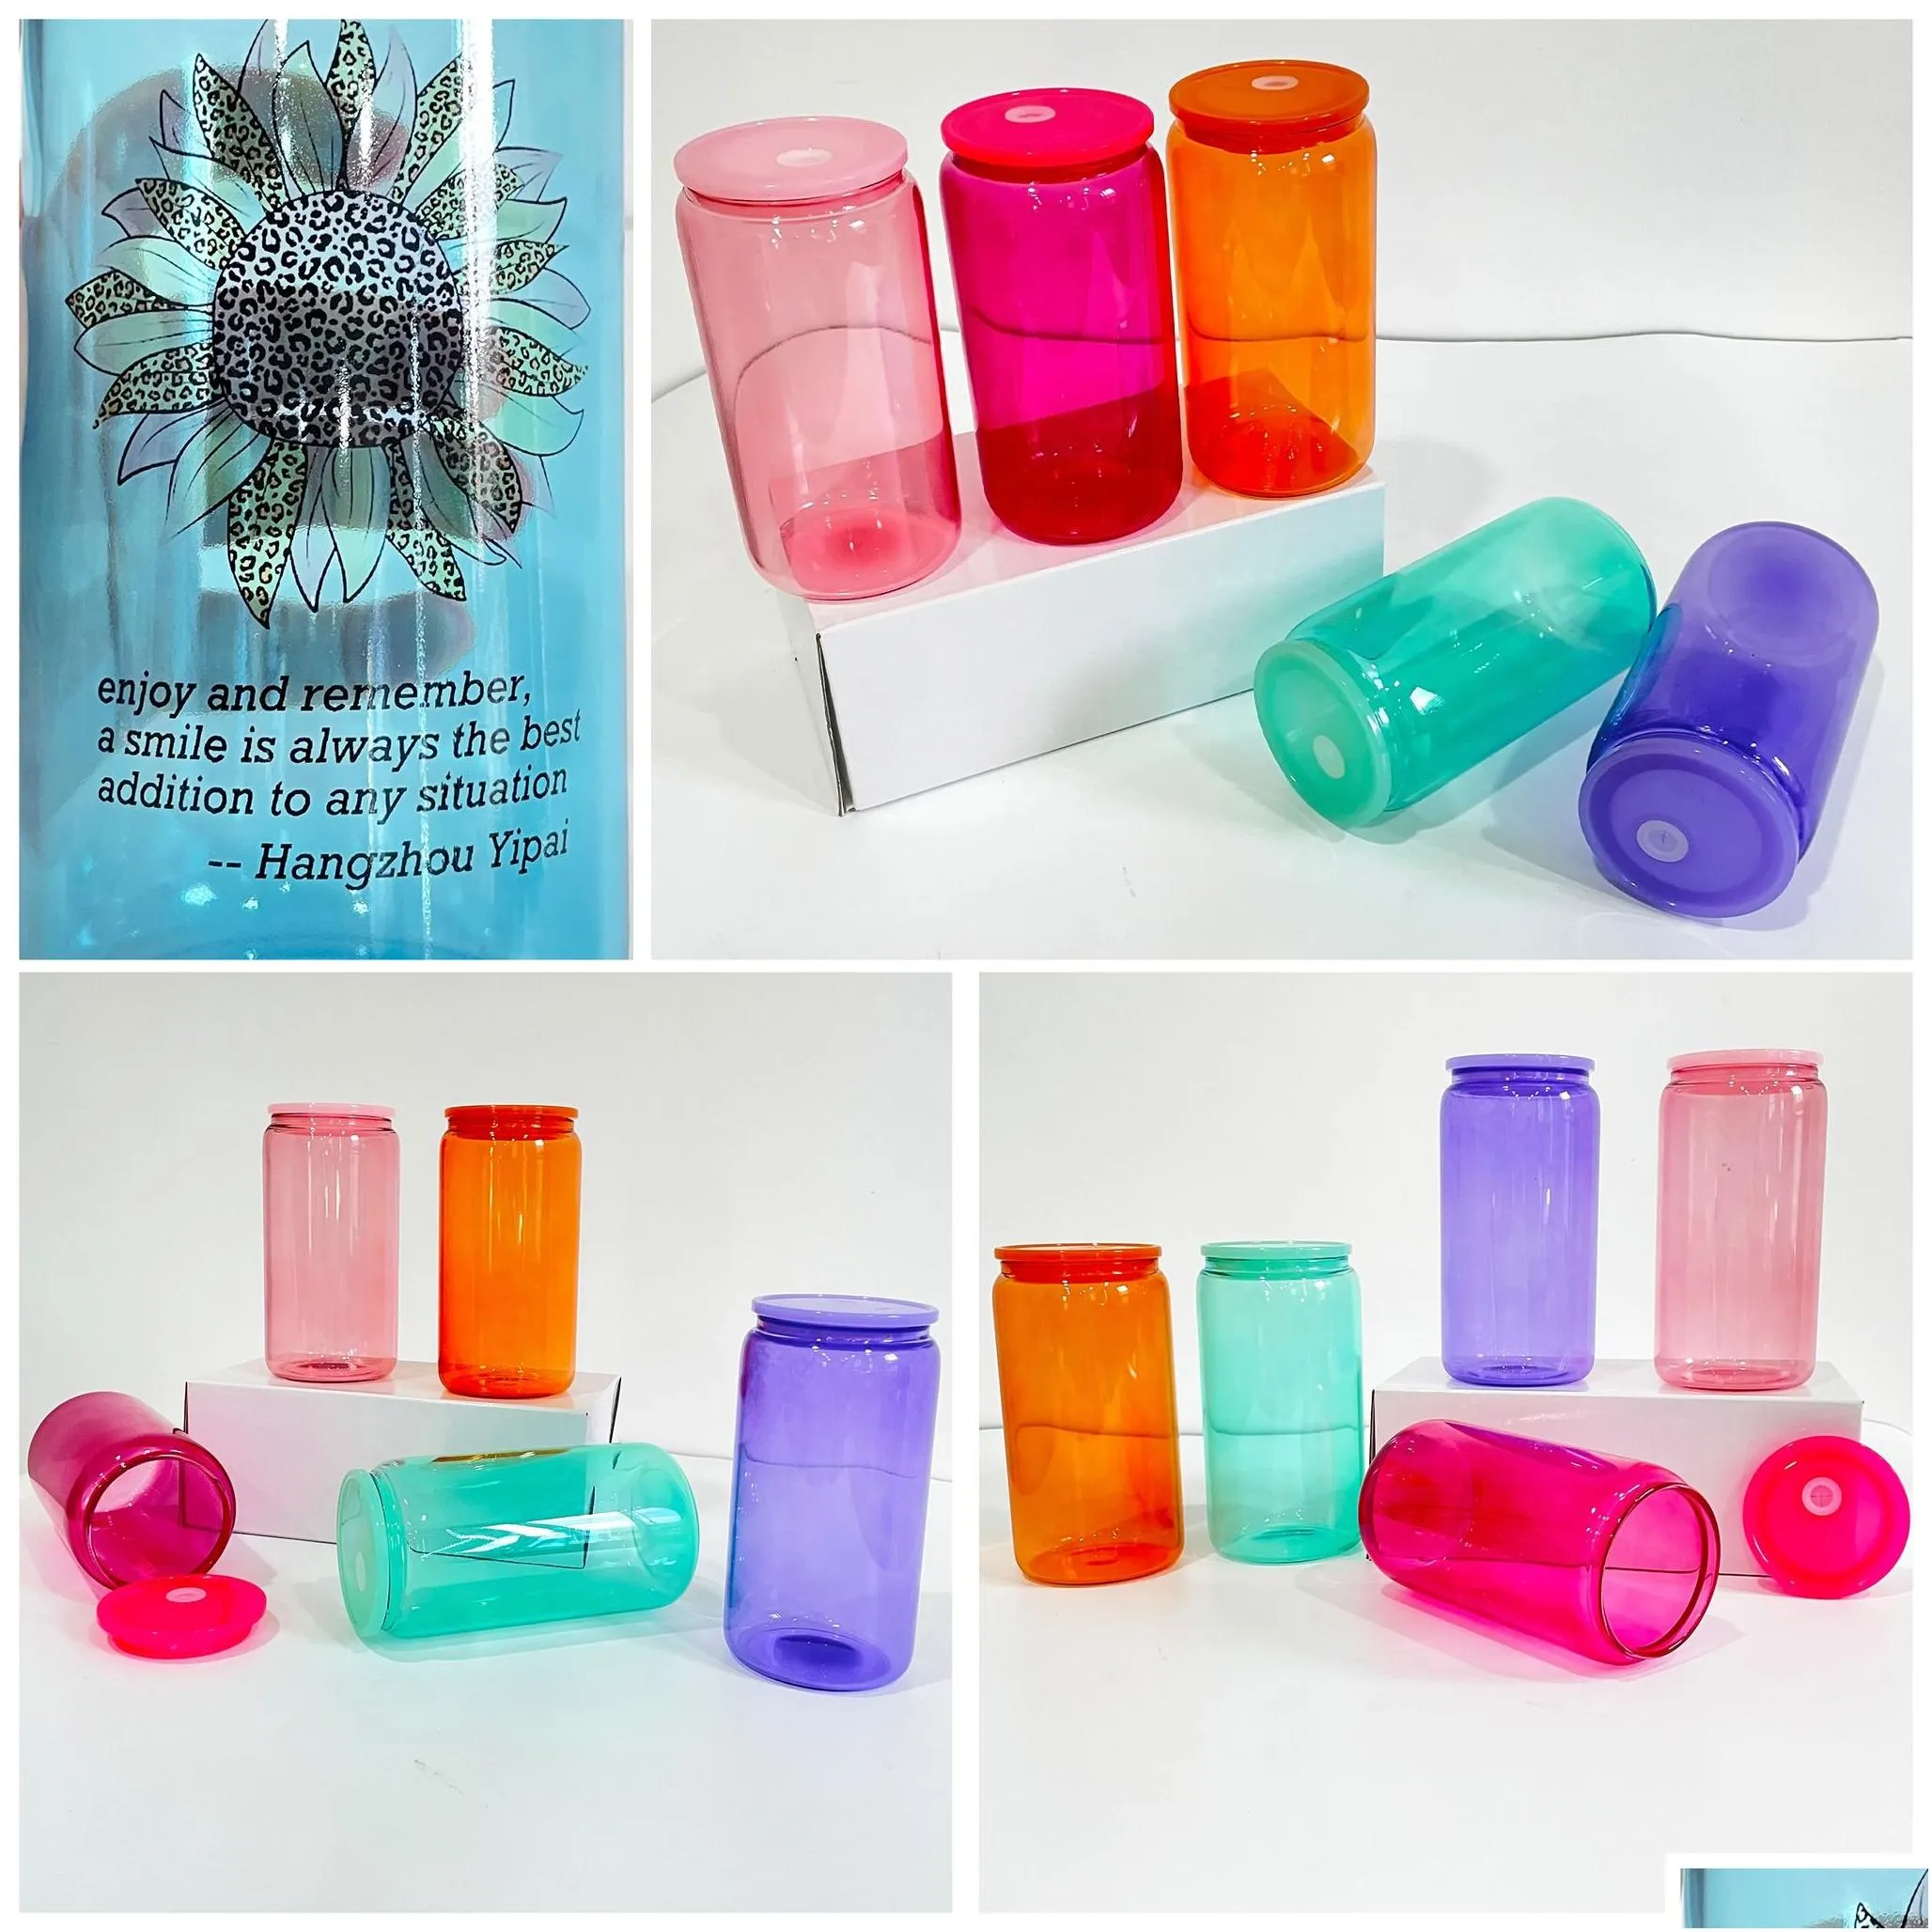 16oz Colorful Sublimation Glass Tumblers In Bulk Cheap With Plastic Lid  Blank Mason Jar For Cola, Beer, Food Cans Set Of 5 From Bdellbeauty, $3.82